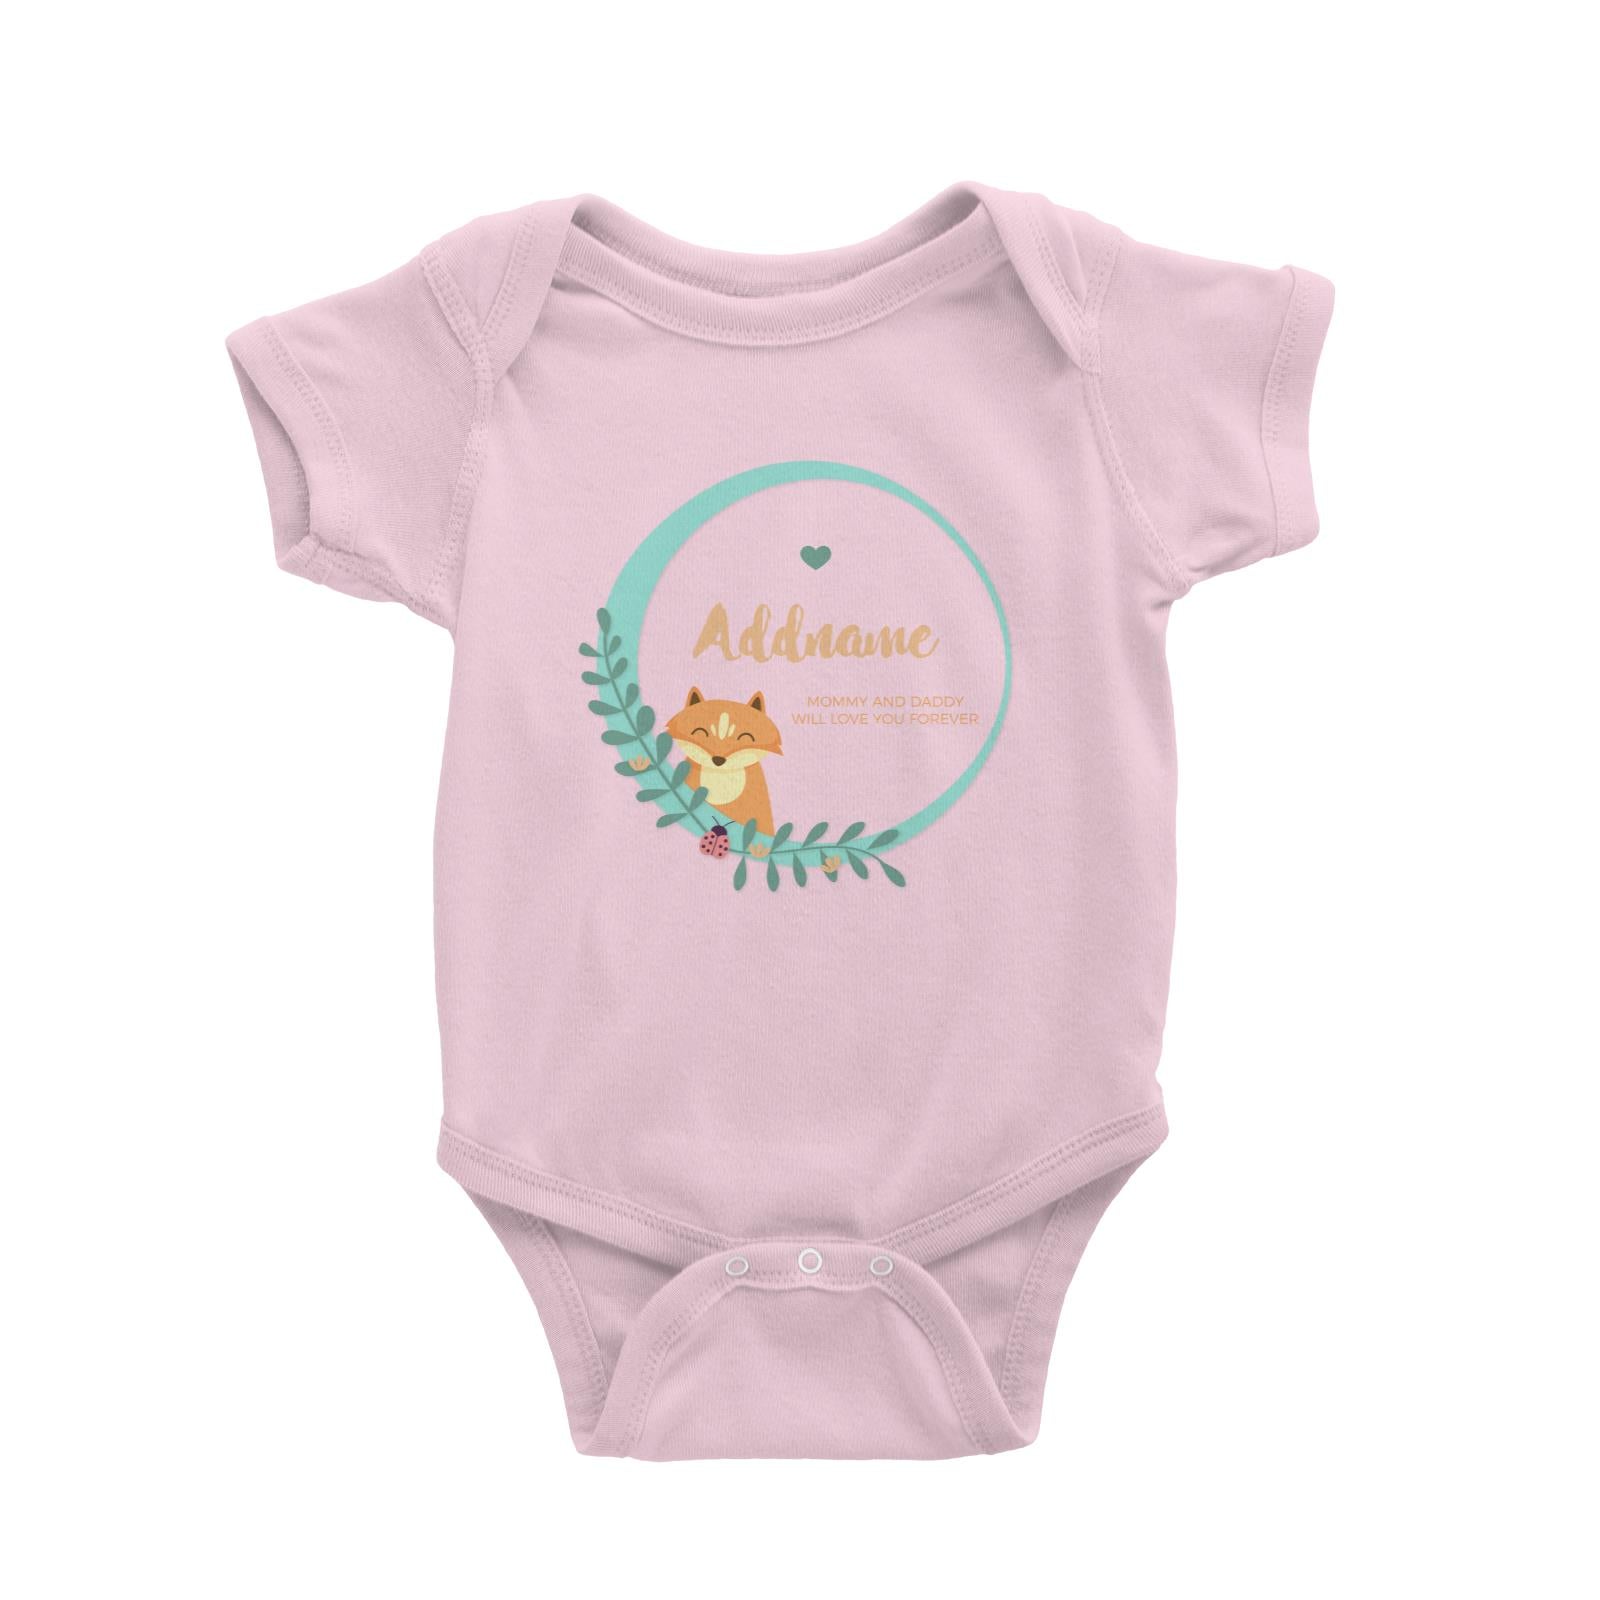 Cute Brown Fox in Turqoise Ring Personalizable with Name and Text Baby Romper